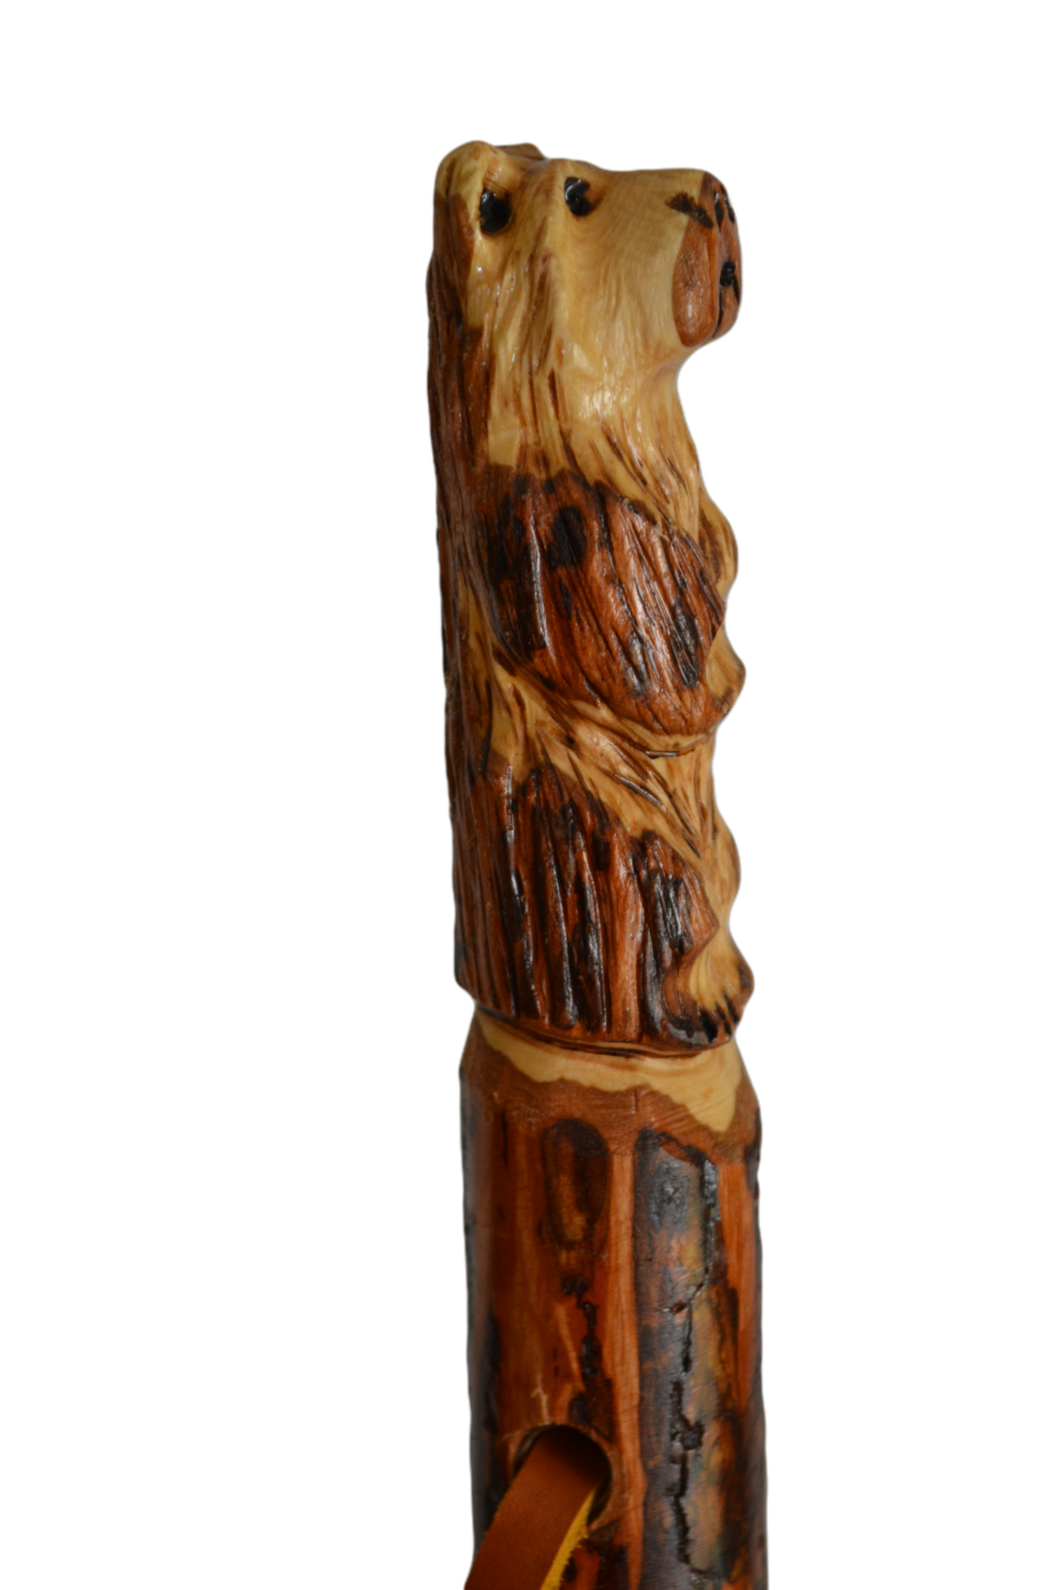 Walking Stick Hickory Bear Carving Wood walking stick Hiking cane Walking support Balance and stability Pain relief Endurance Mobility Fashionable accessory Durable wood Customized height Trail walking Outdoor enthusiast Natural finish Handcrafted Rustic charm Sustainable wood Eco-friendly Artisan made